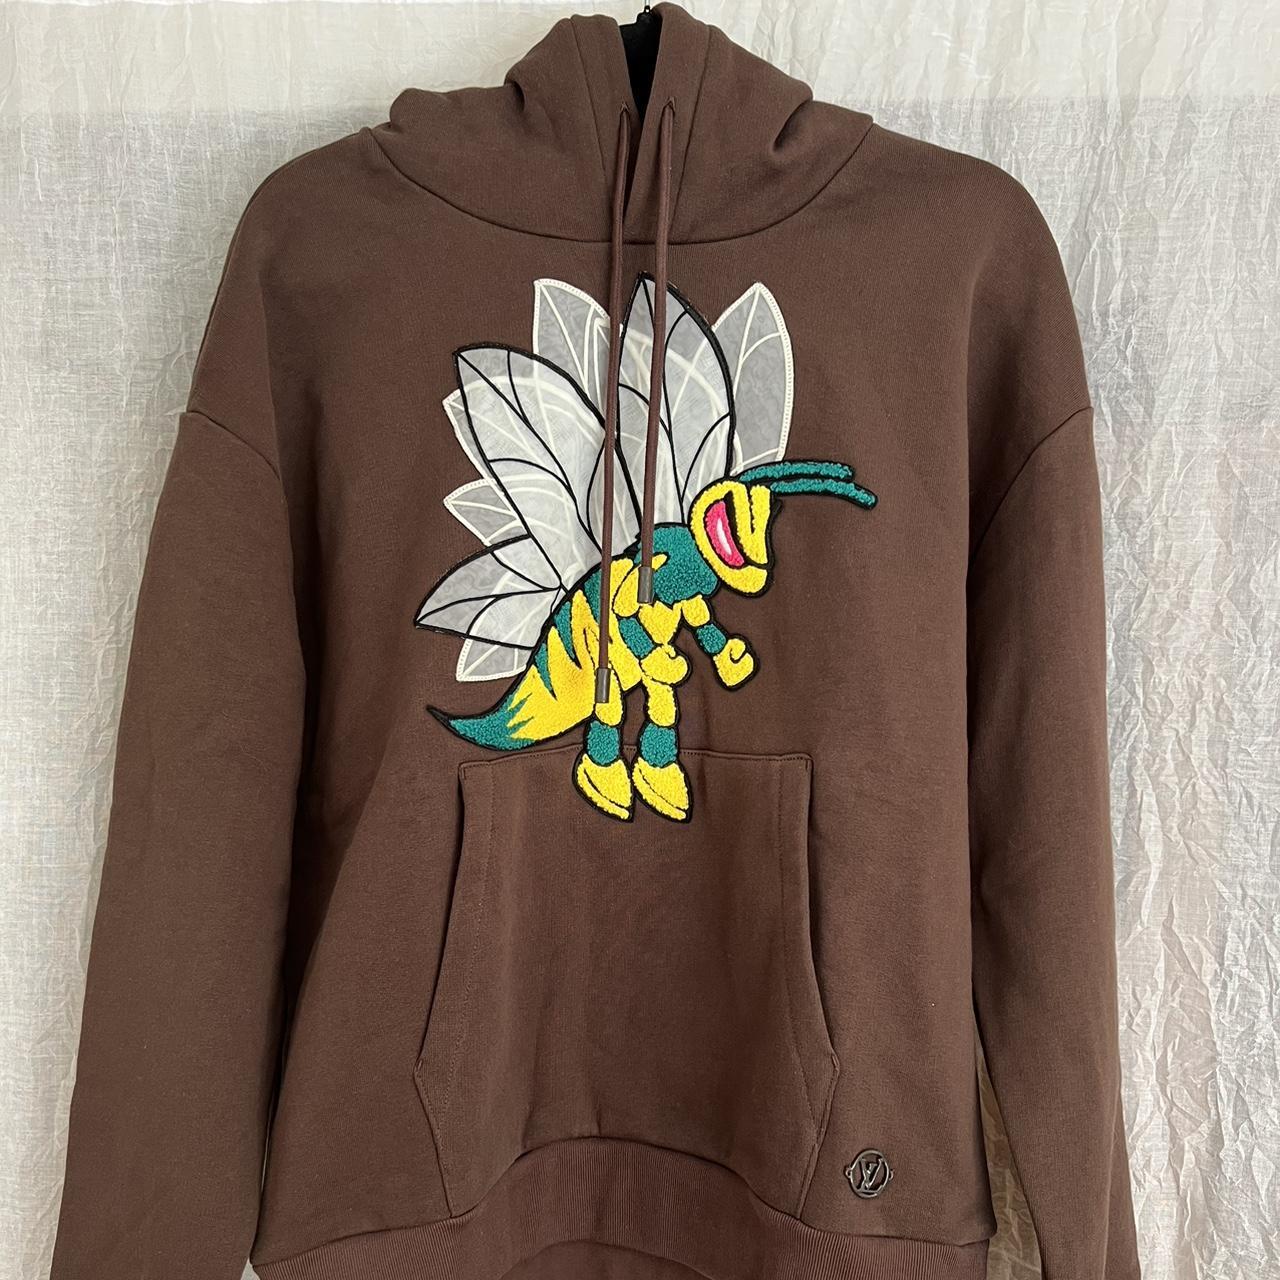 Louis Vuitton Graphic Bee Patched Hoodie Dark BROWN. Size XL